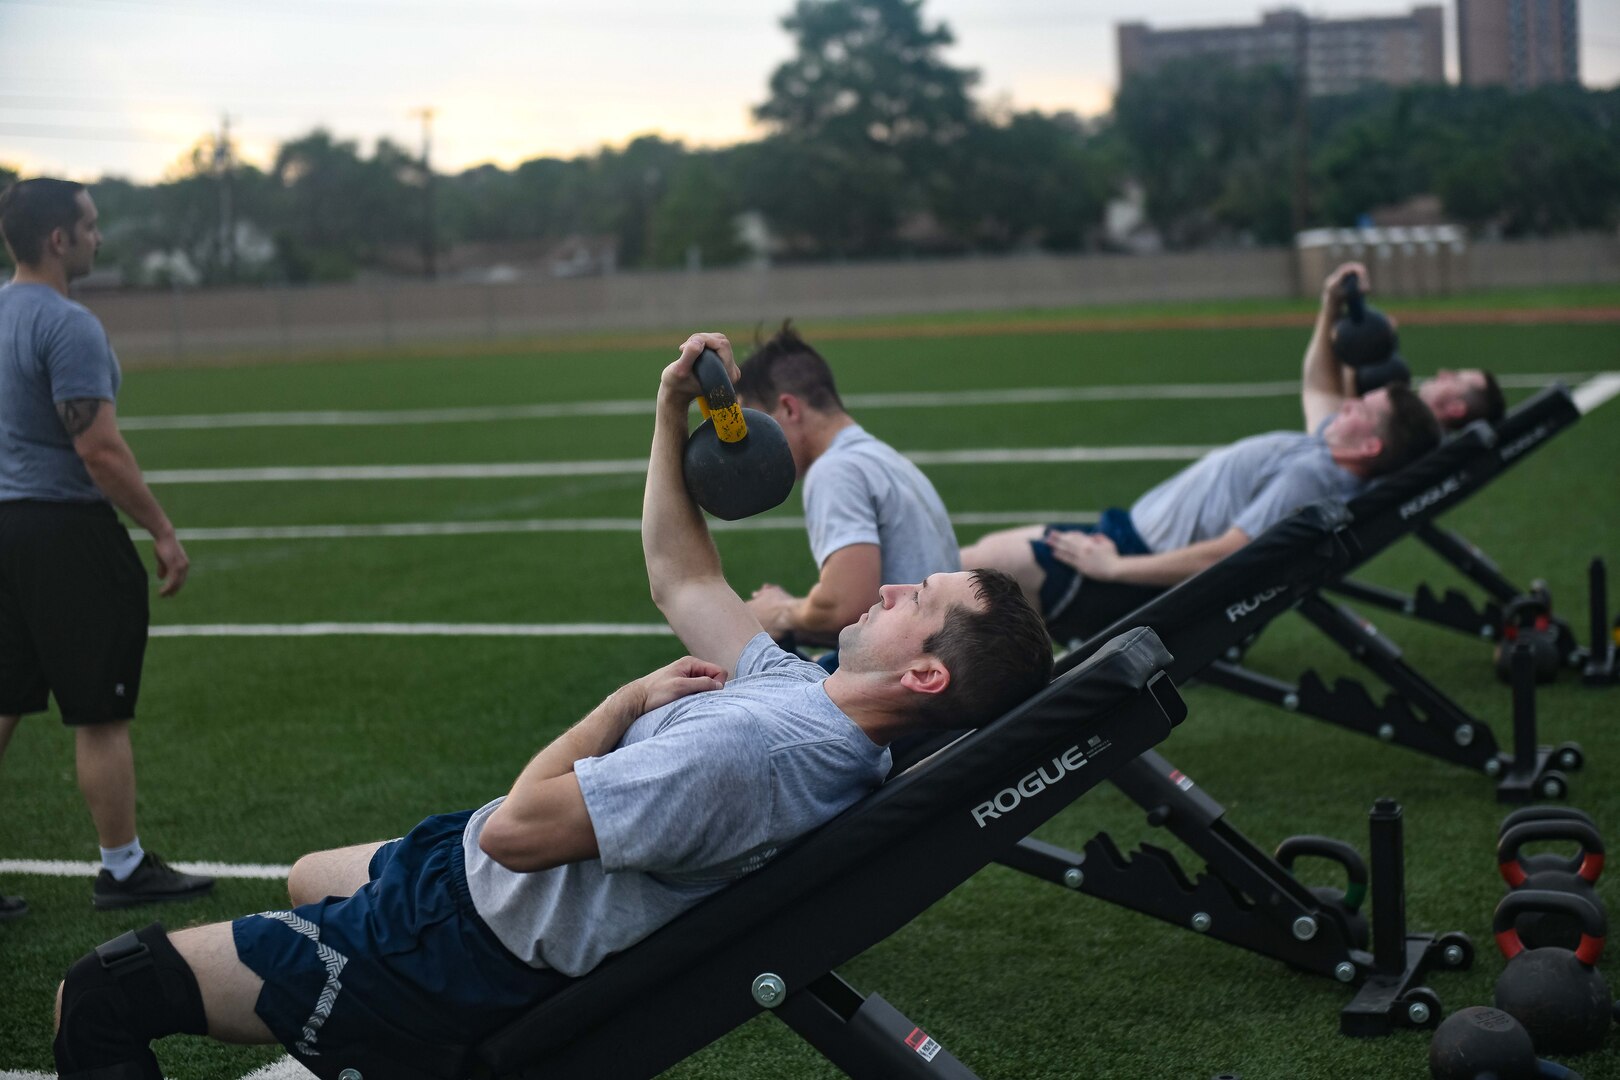 Four Airmen perform one arm weighted presses while instructor watches to ensure proper technique.